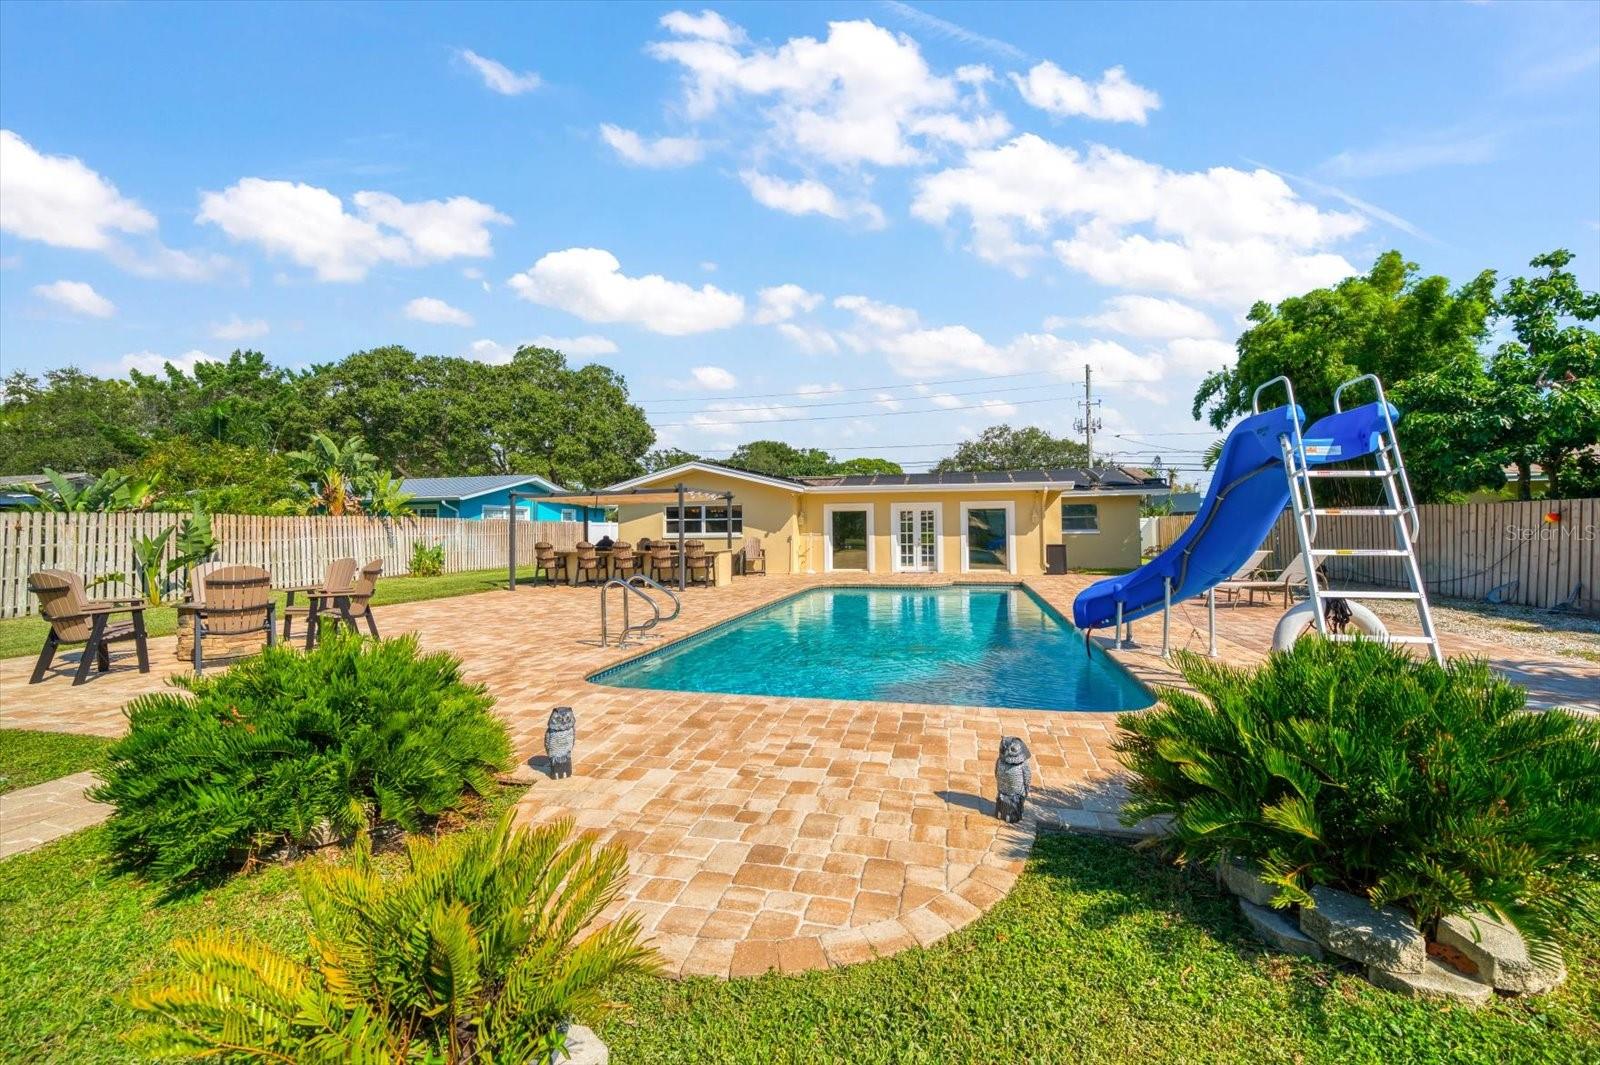 Lushly landscaped yard! Fun for everyone in the pool or at the outdoor gathering areas.